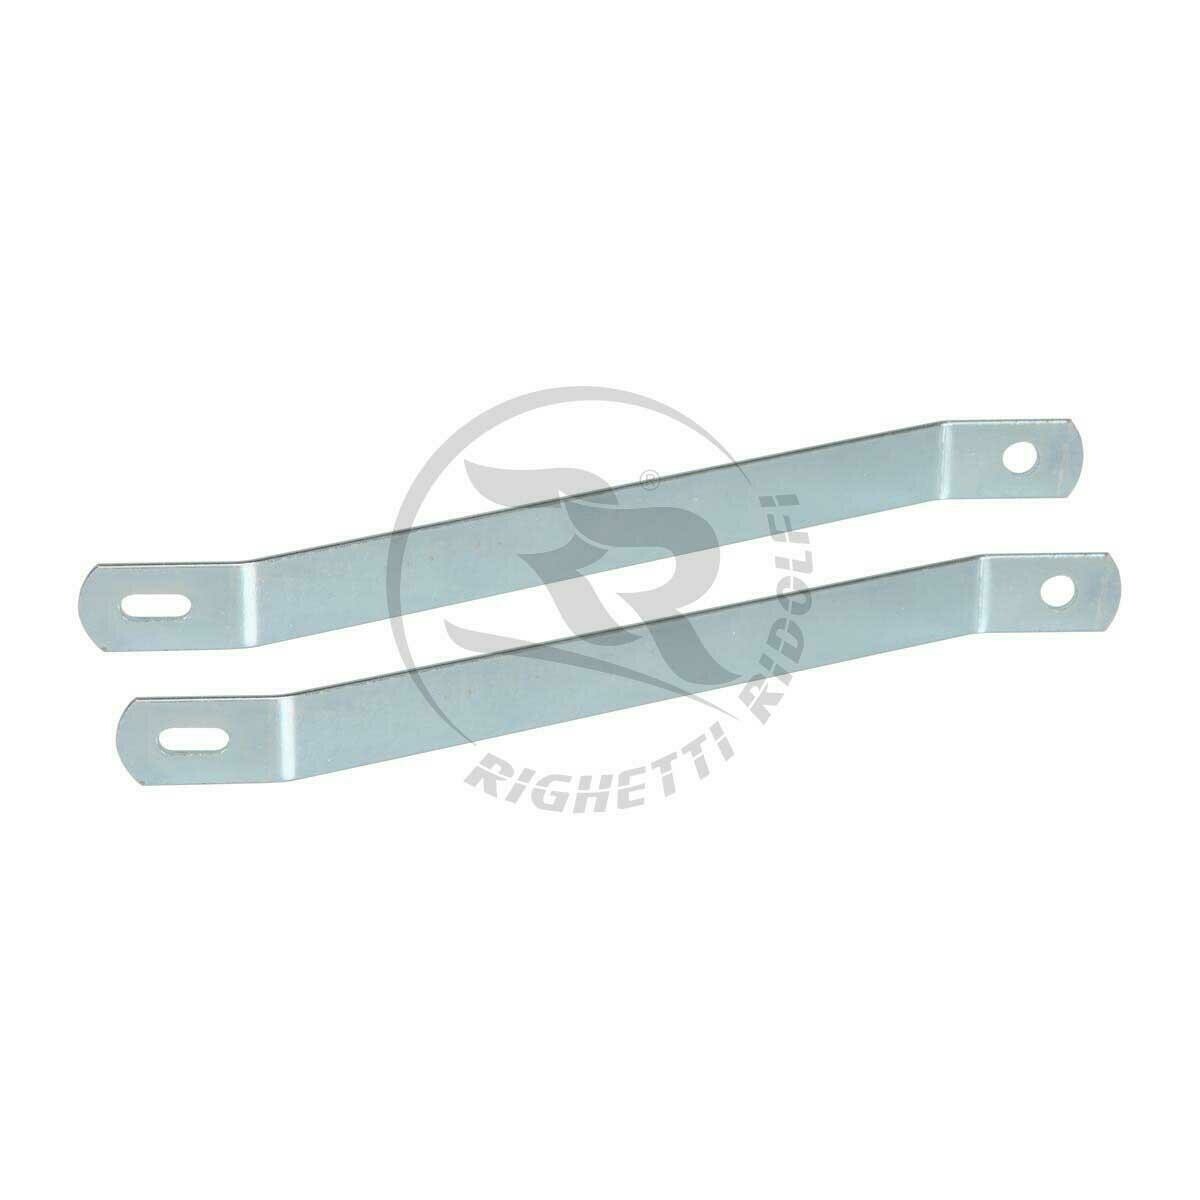 Upper Support Double for Front Panel, L. 24cm